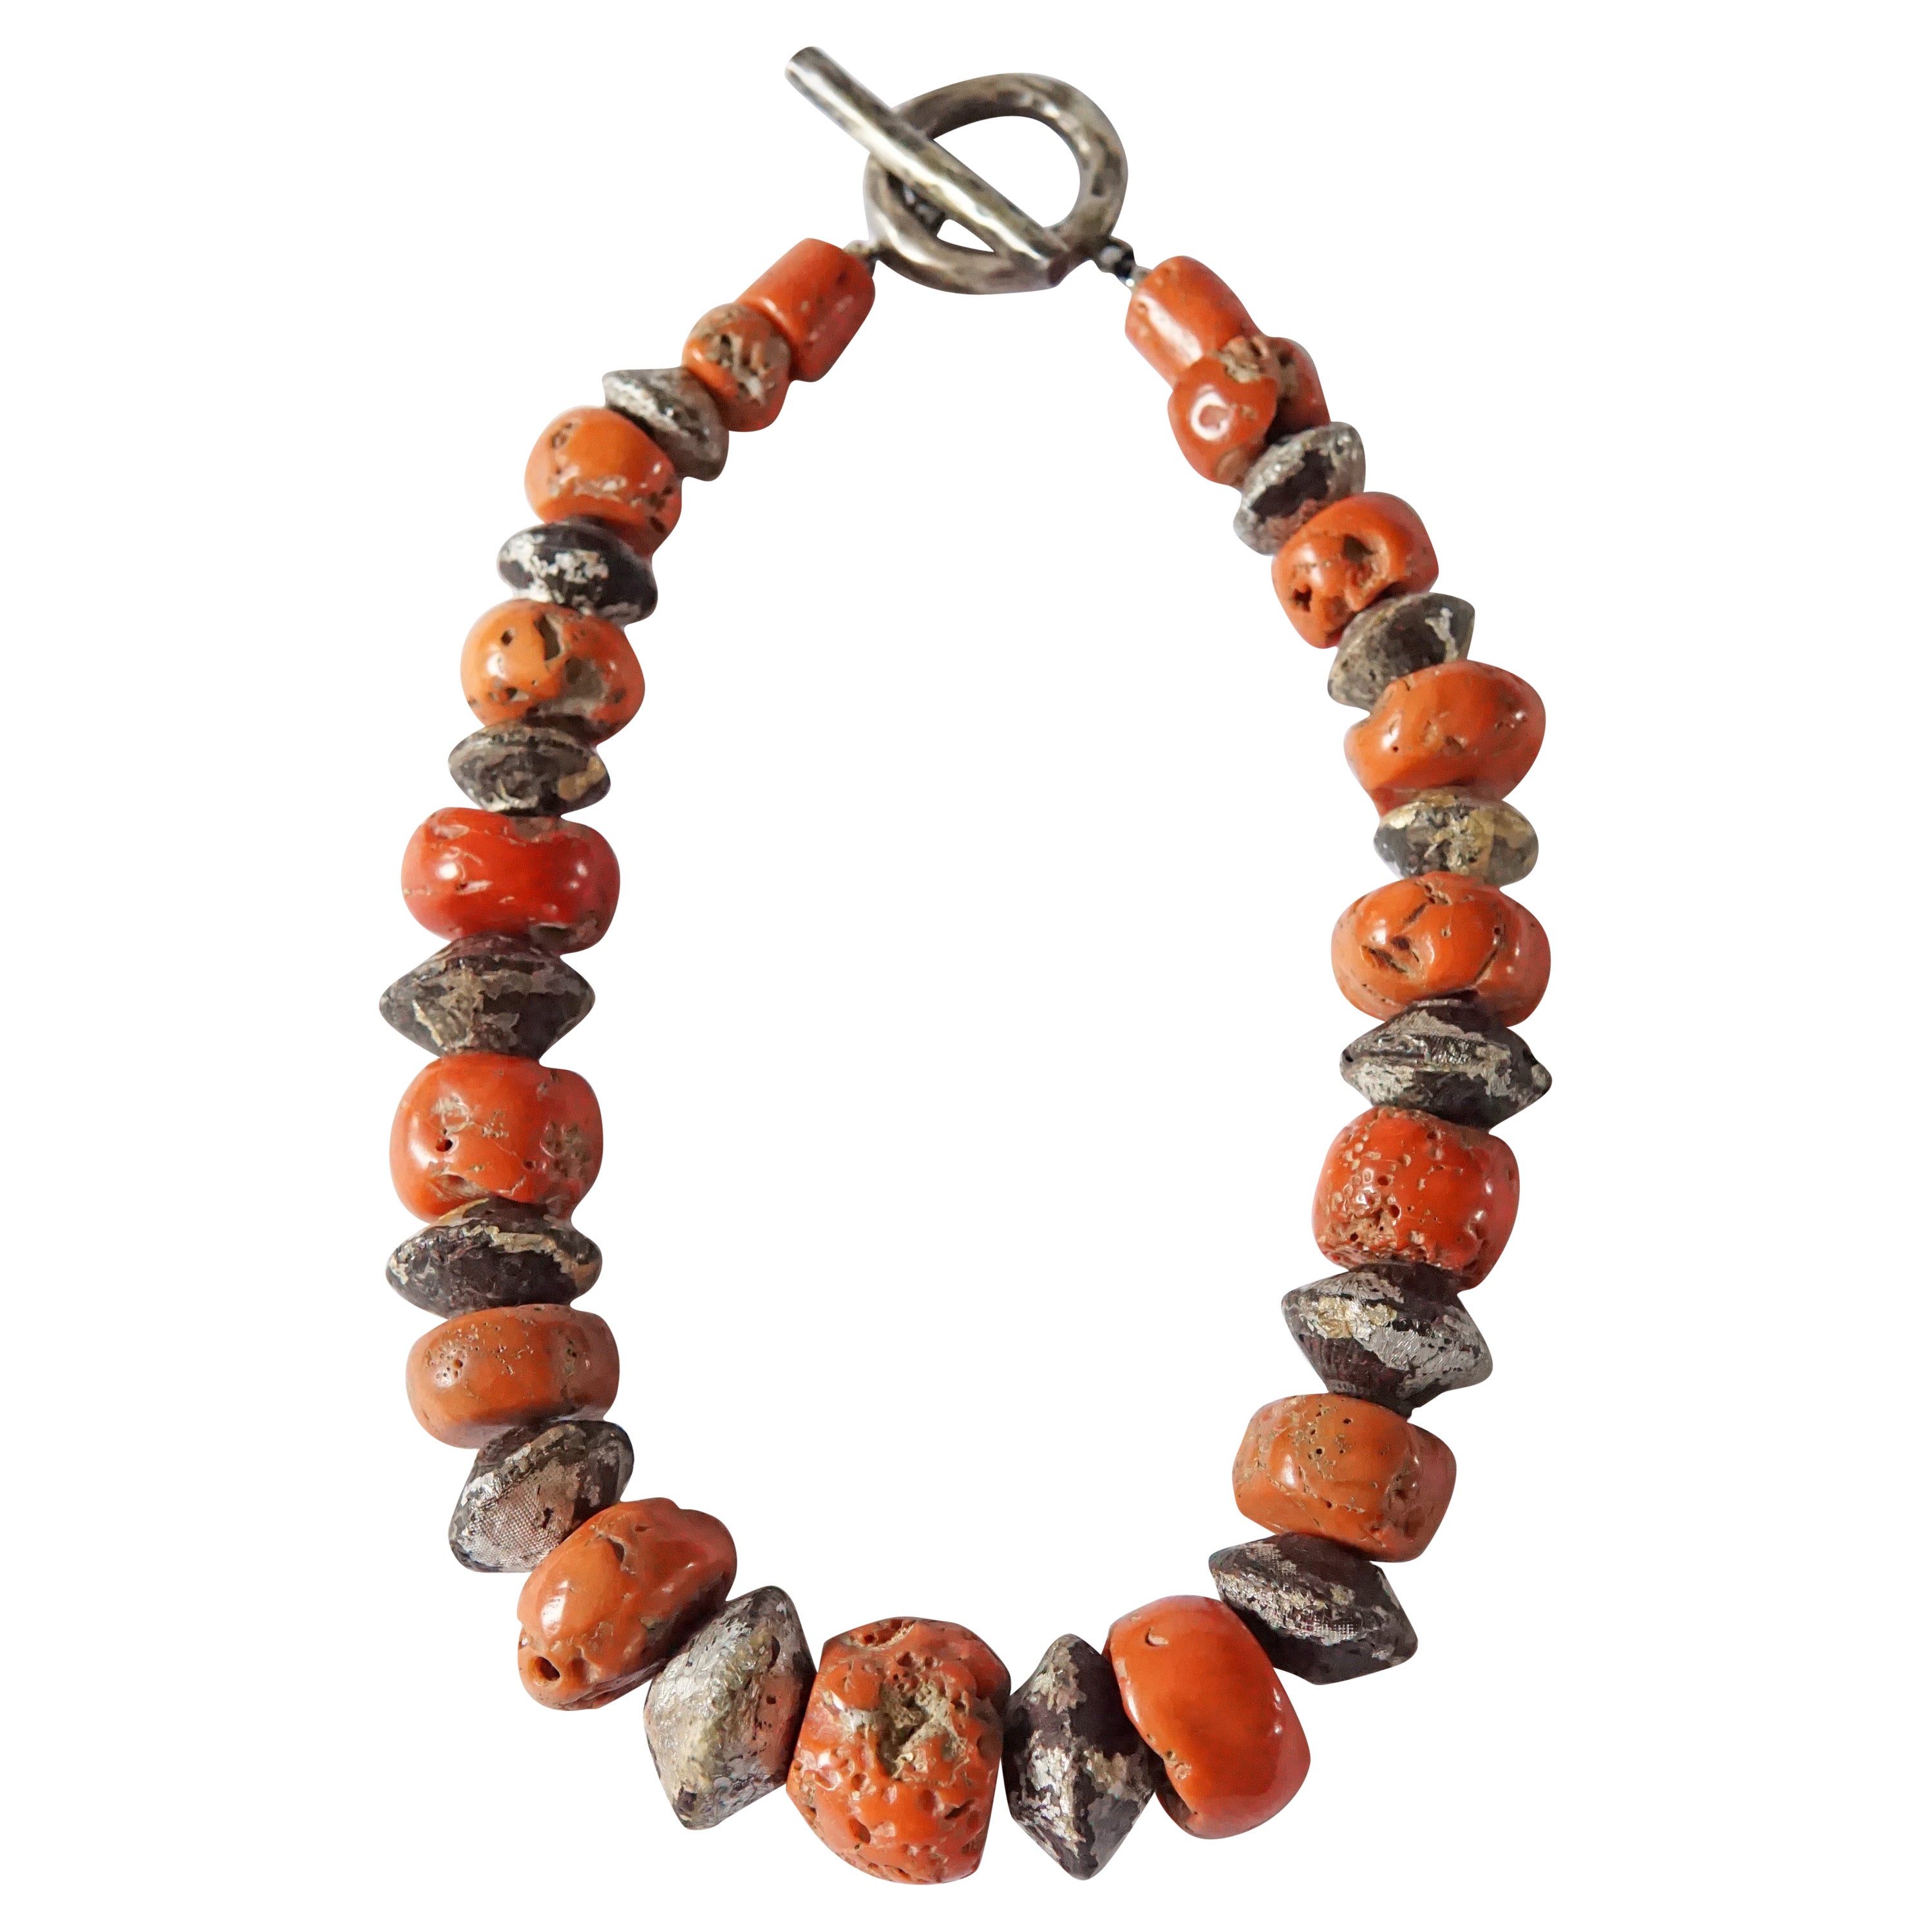 Tibetan Coral Necklace with Silver Painted Wooden Beads c. 1900 For Sale at  1stDibs | tibetan coral beads, coral bead necklace, tibetan coral jewelry